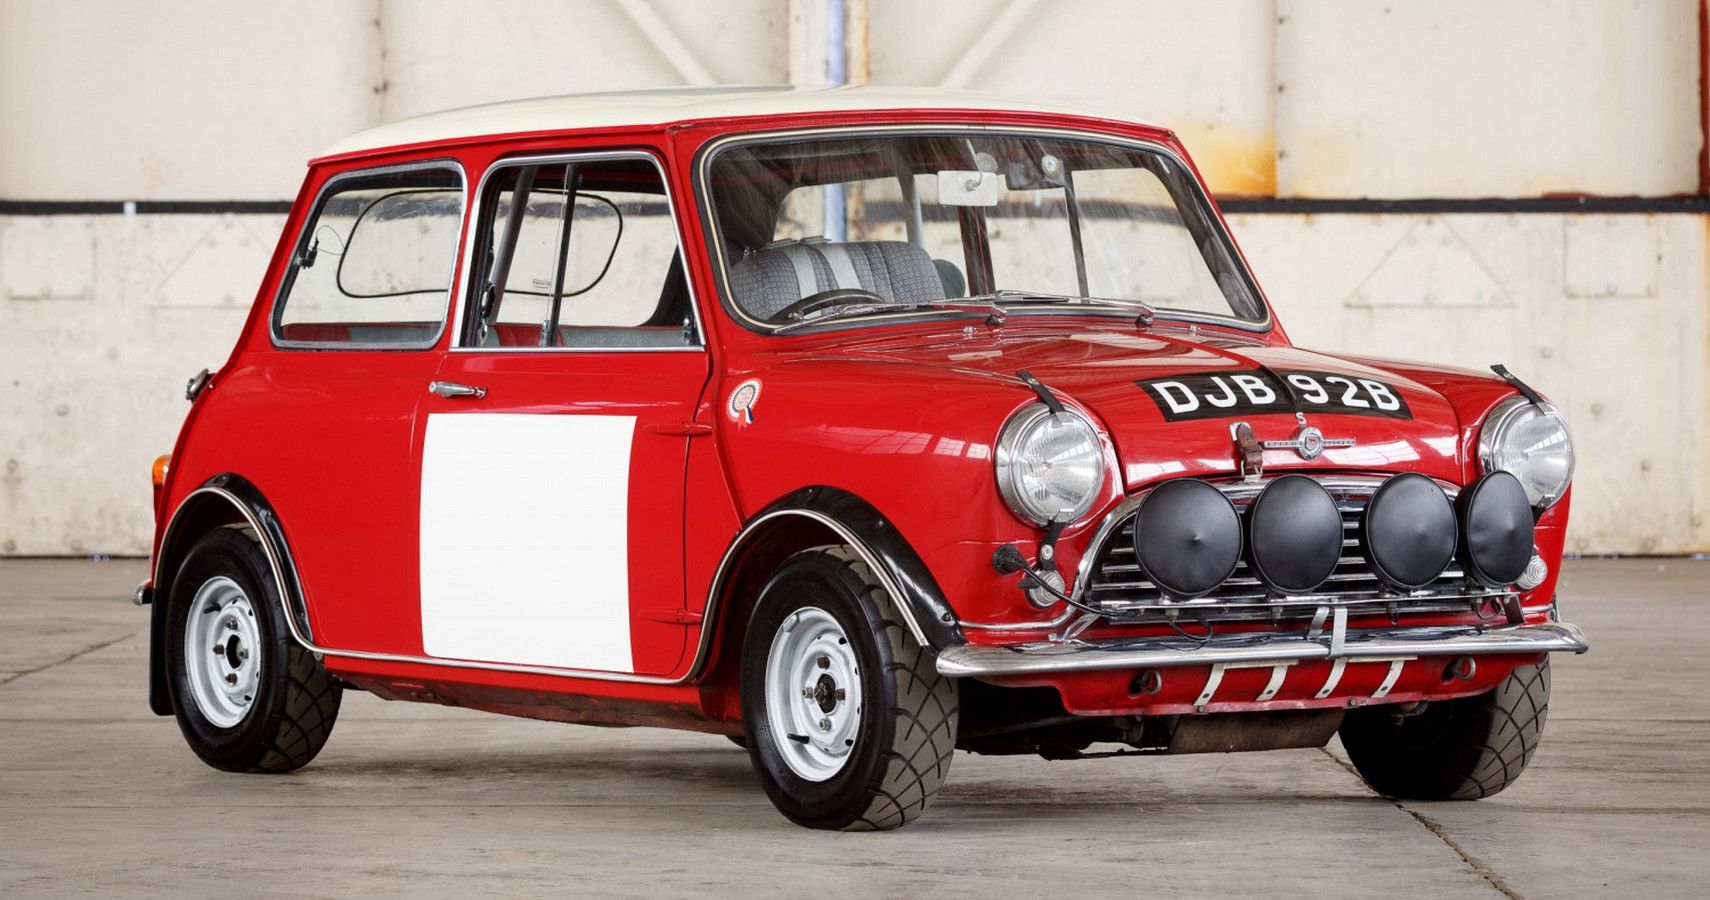 Spotlight on the classic Mini - 10 facts you might not know.